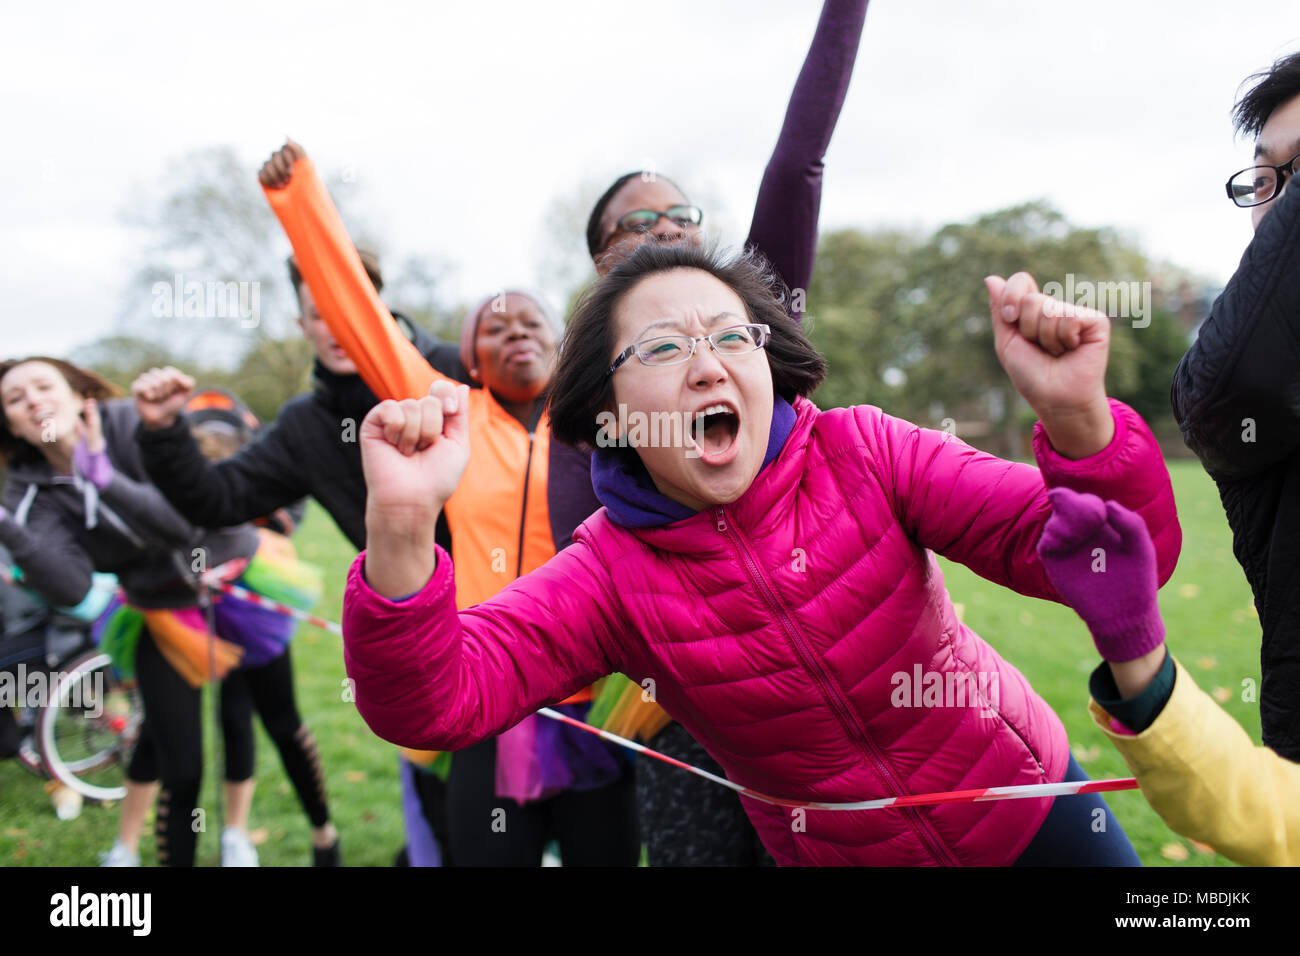 Enthusiastic female spectator cheering at charity run in park Stock Photo